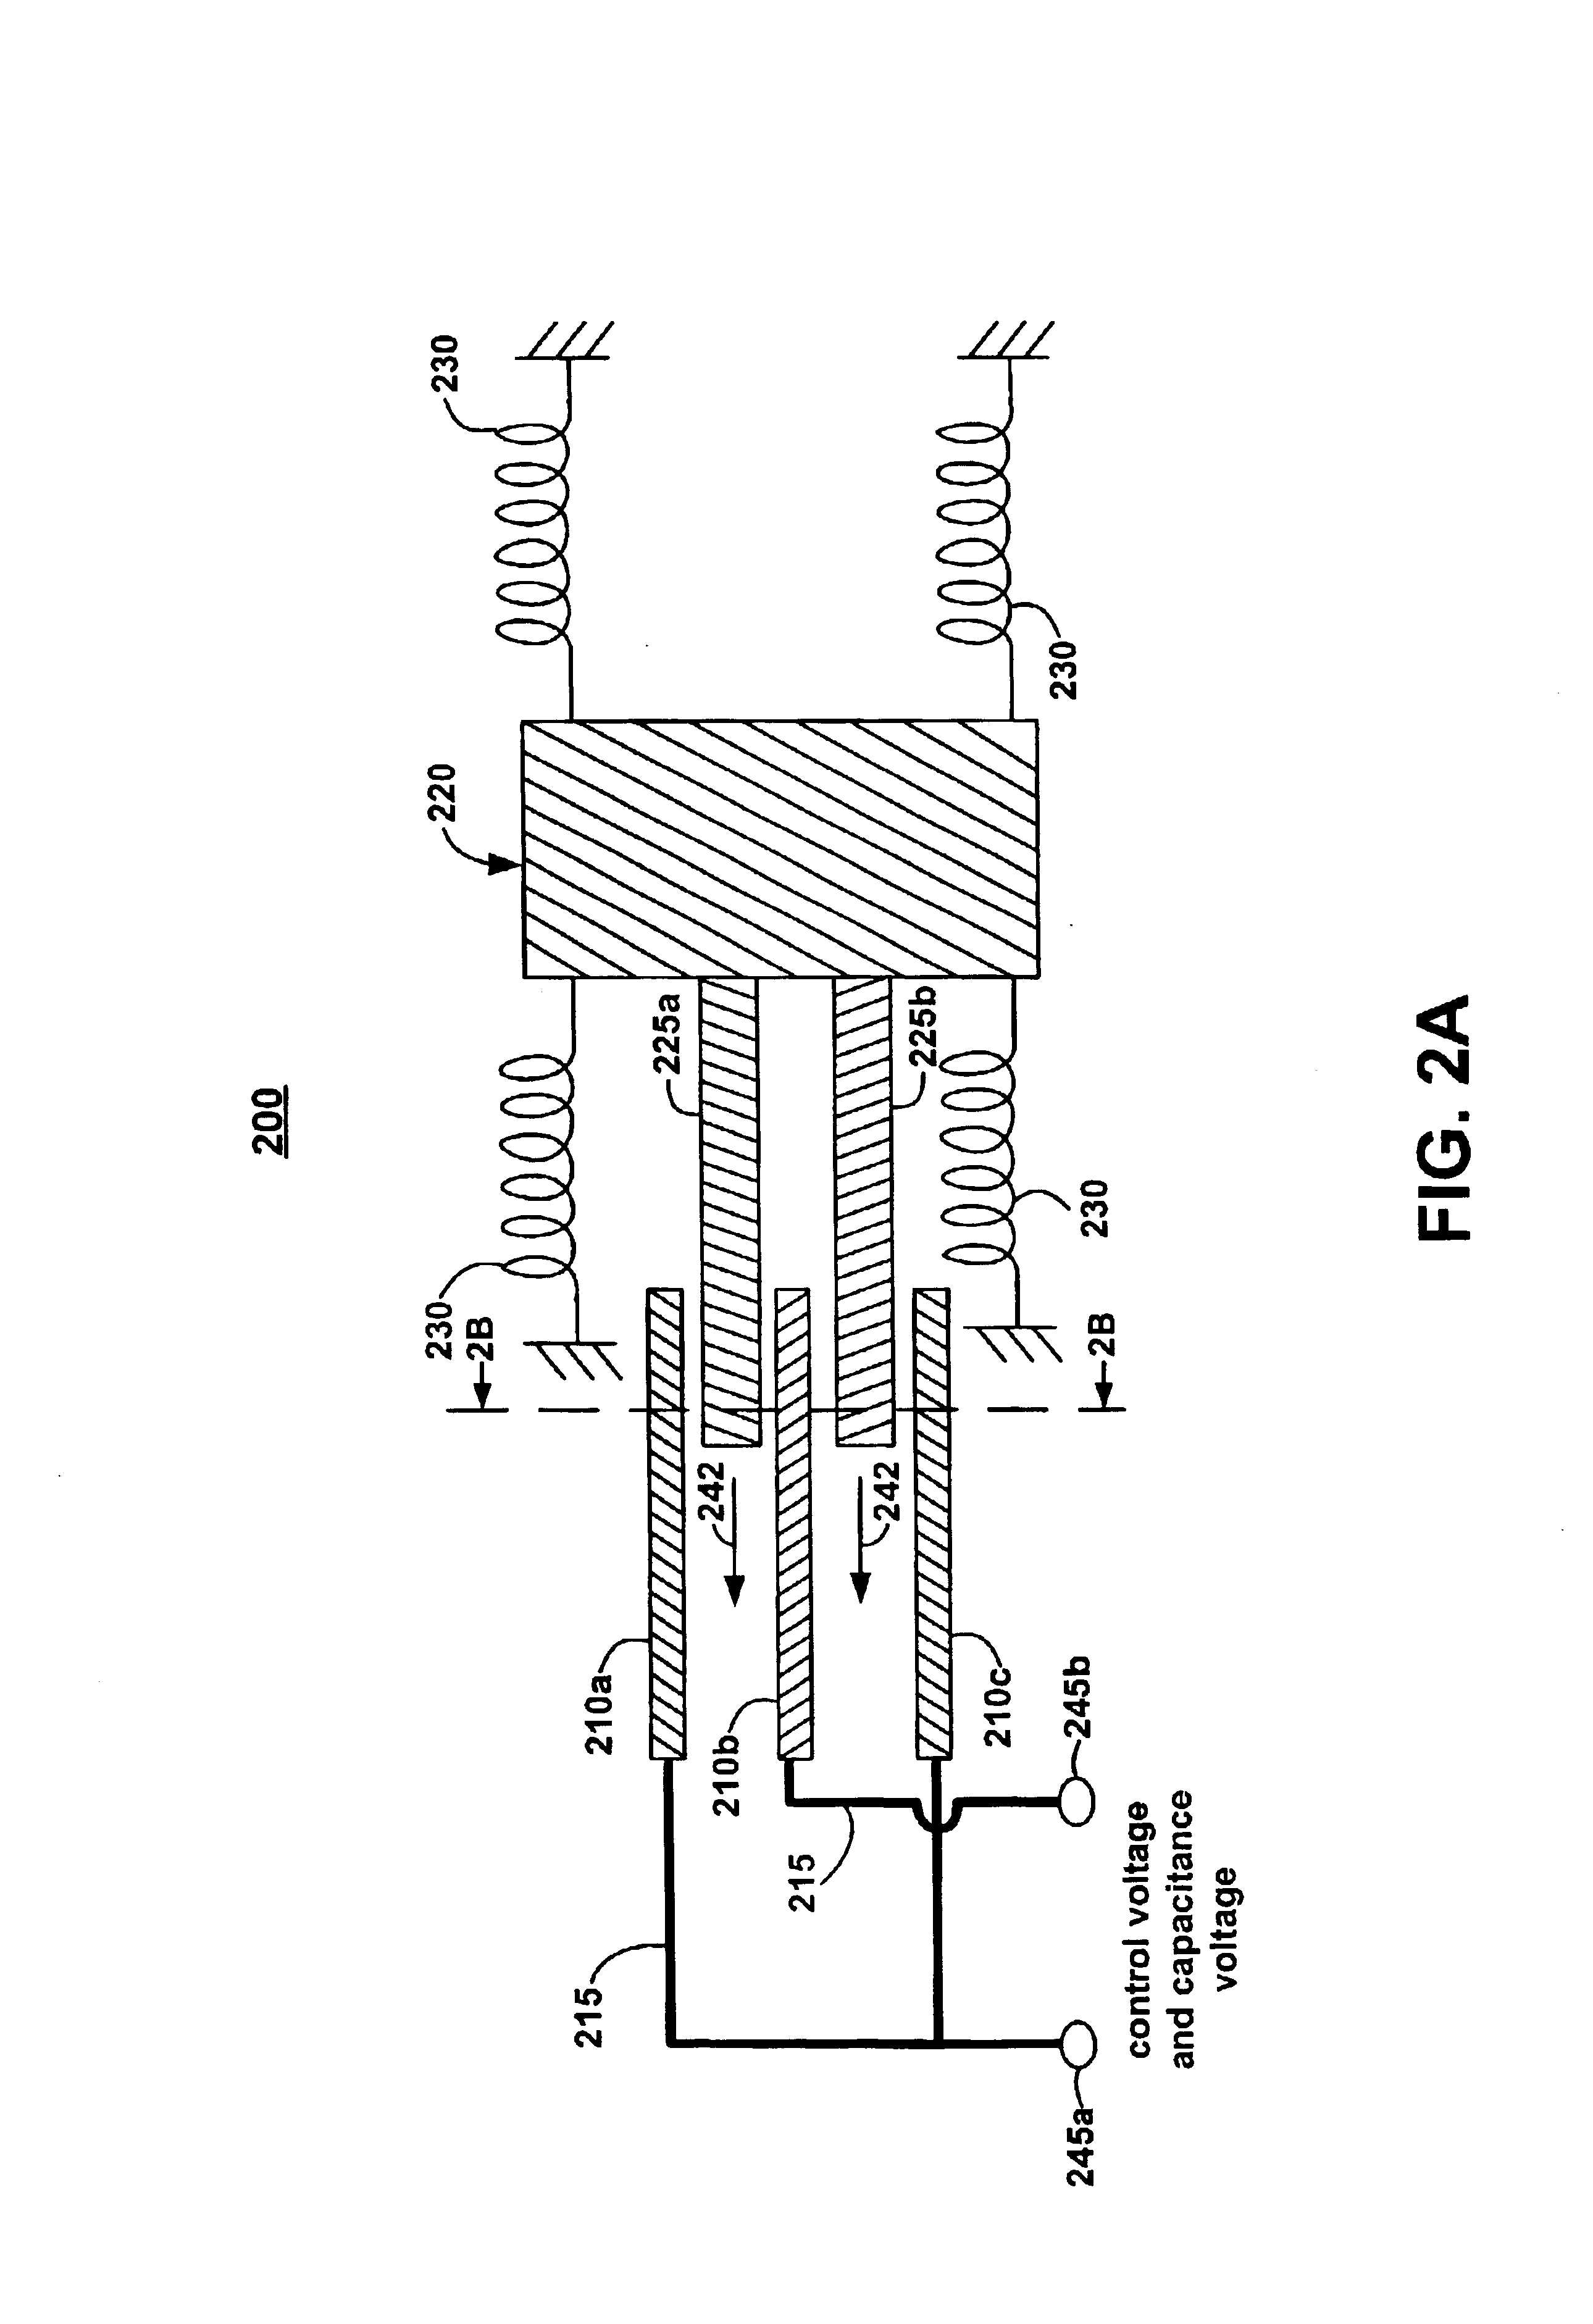 Tunable capacitor